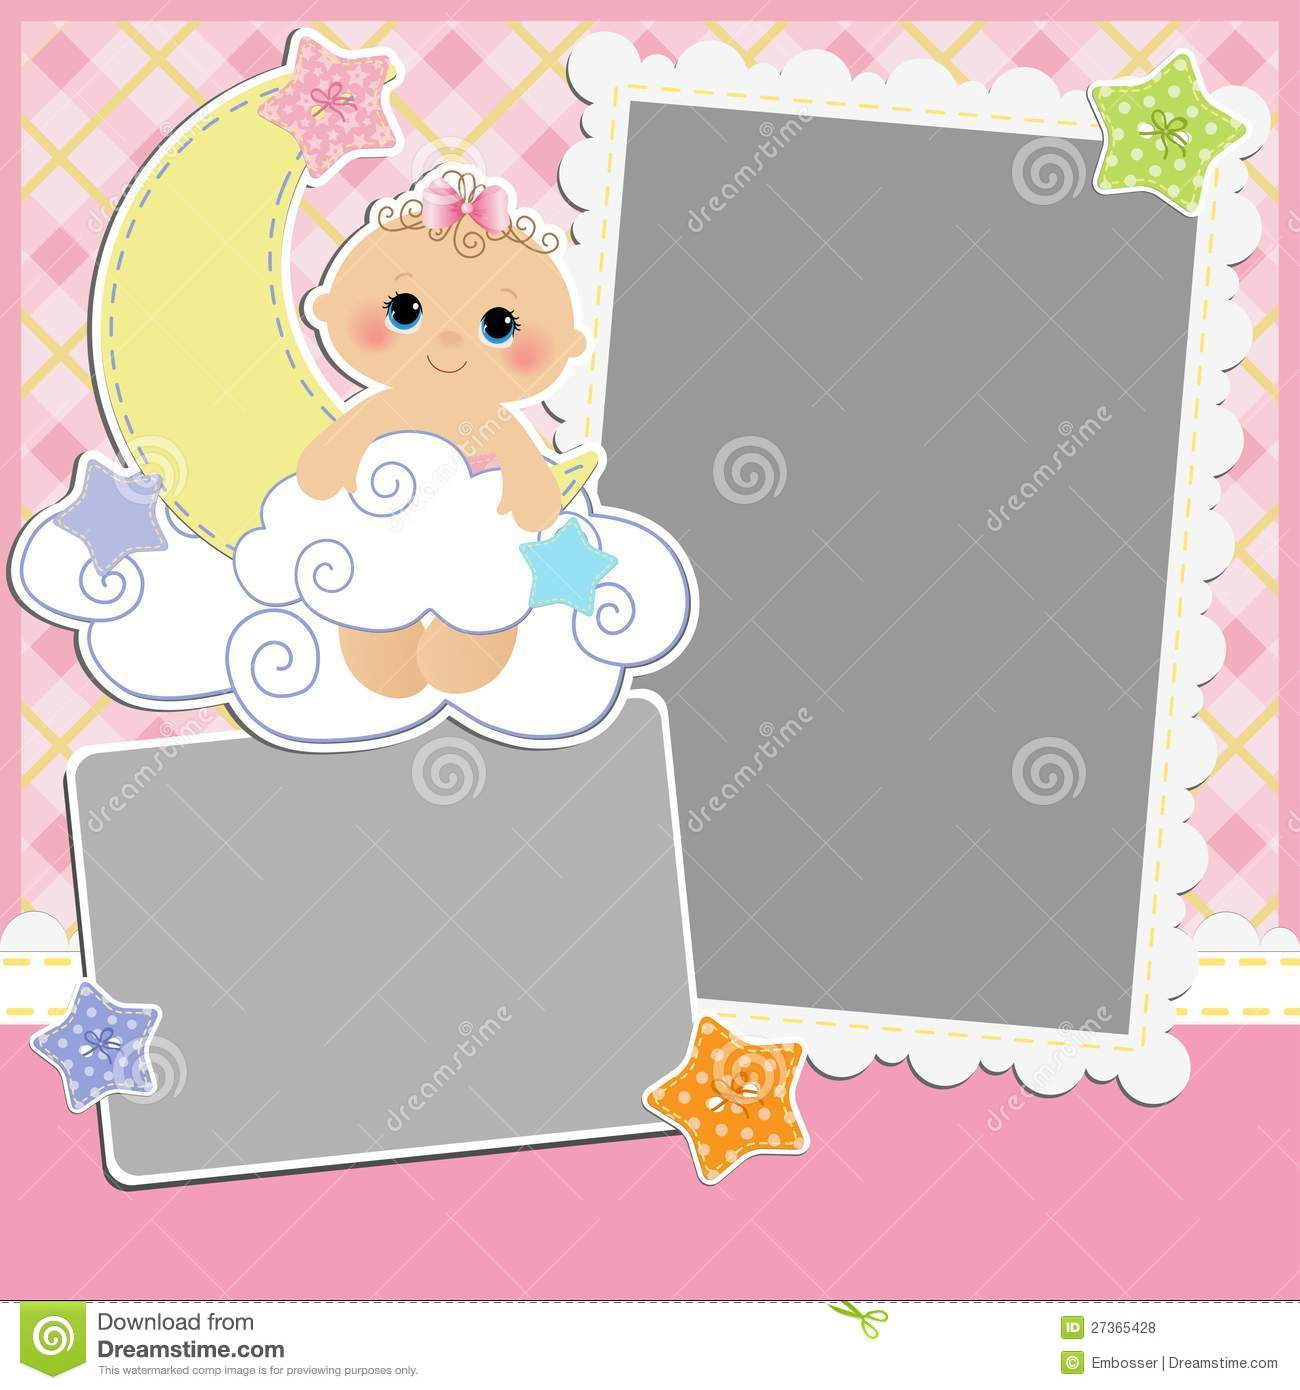 003 Free Printable Baby Cards Templates Template Ideas About Every - Free Printable Baby Cards Templates